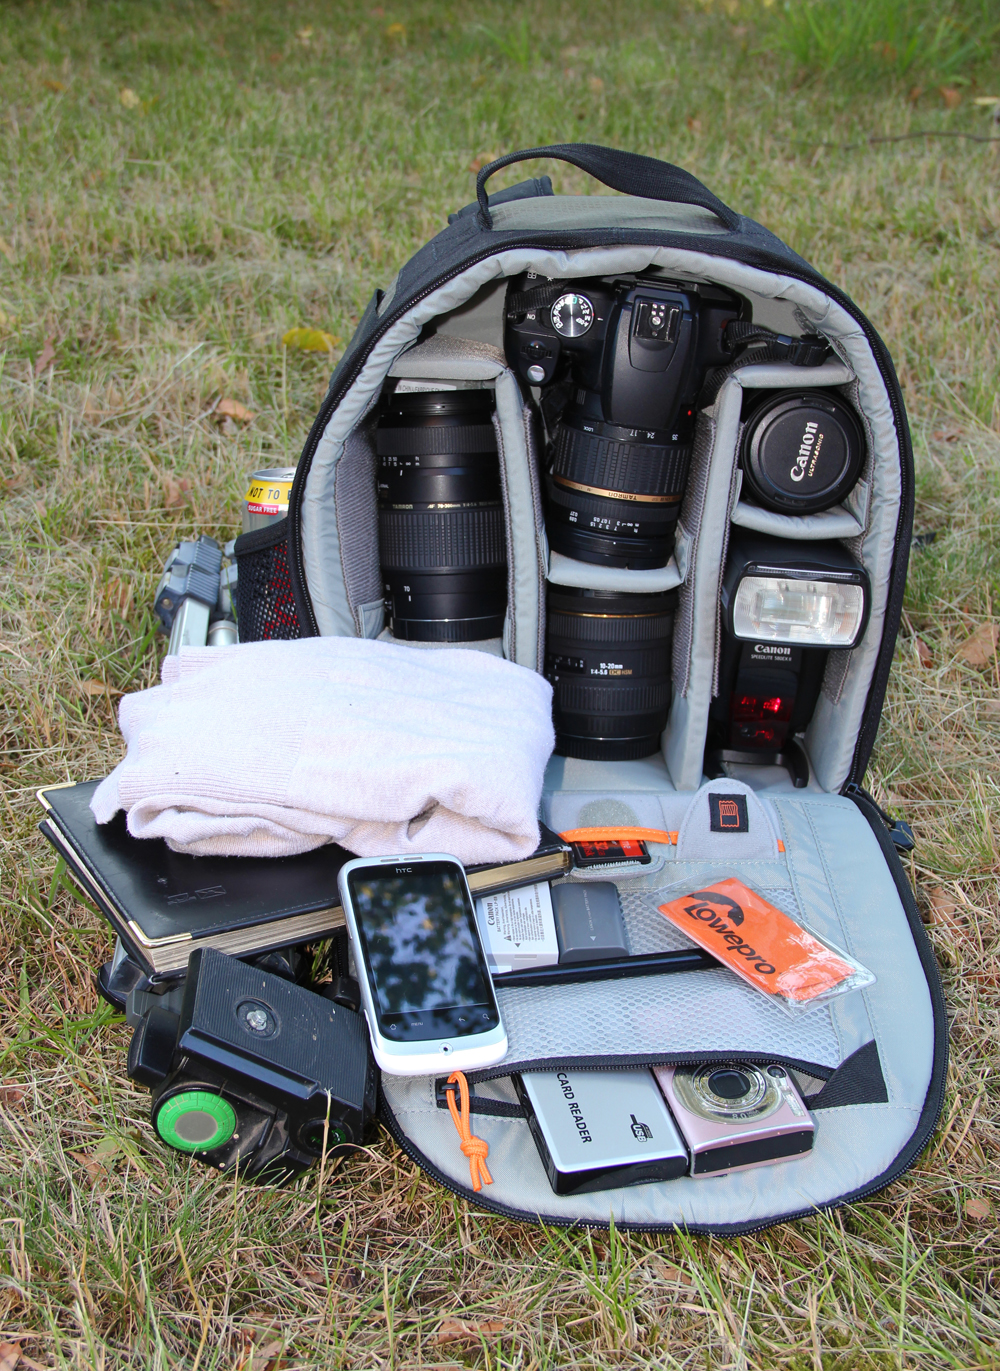 Lowepro Pro Runner 200 AW Review | Wex Photo Video